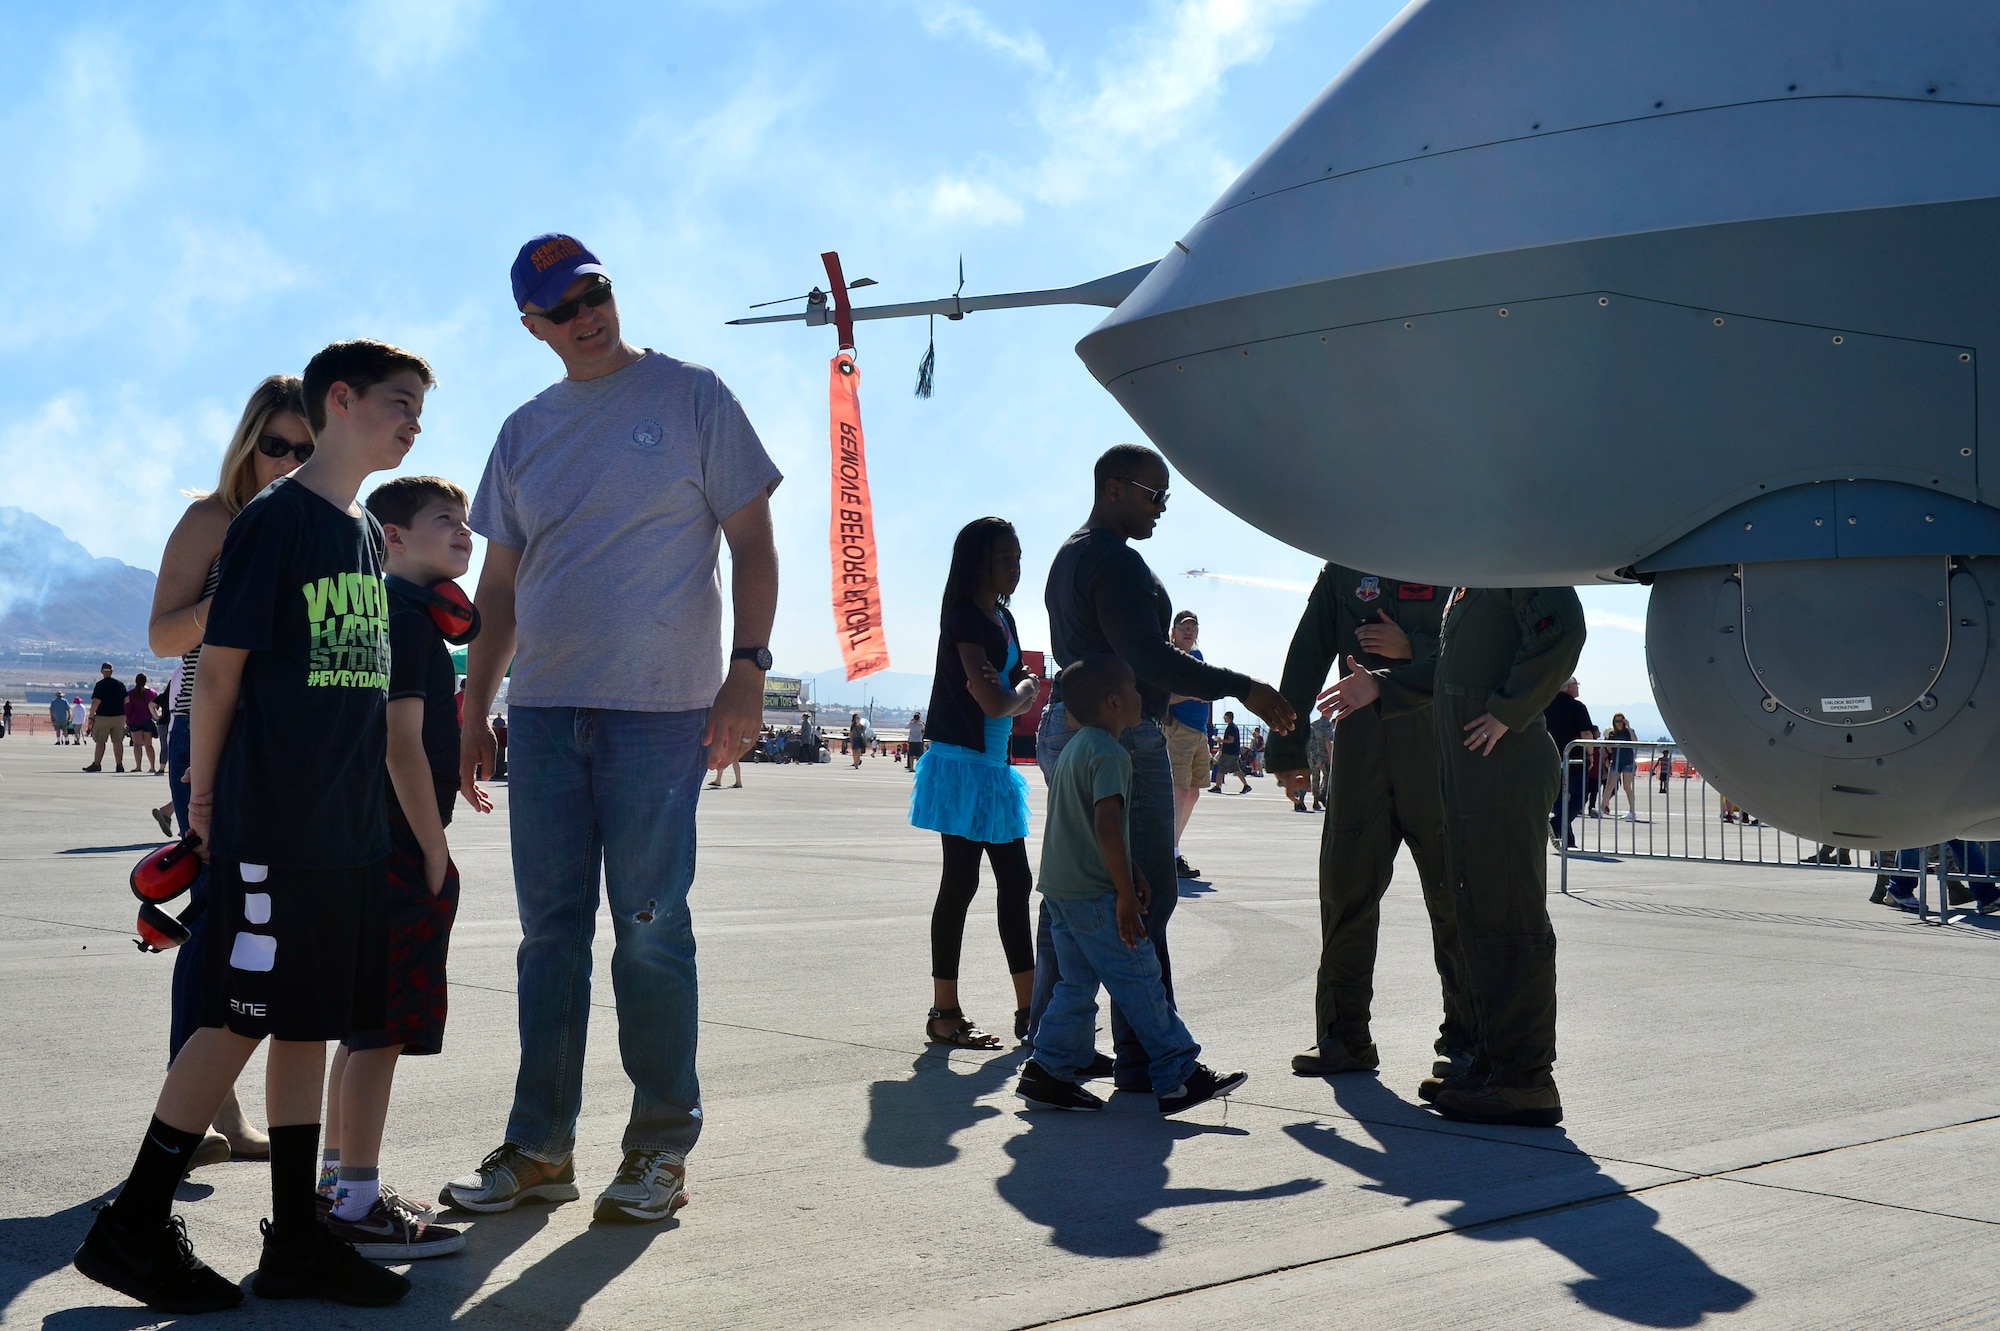 Spectators get a closer look at an MQ-9 Reaper during Aviation Nation Nov. 11, 2016, at Nellis Air Force Base, Nevada. Members from Creech Air Force Base, Nevada, brought an MQ-9 Reaper and MQ-1 Predator to the open house to display its capabilities. (U.S. Air Force photo by Senior Airman Christian Clausen/Released)